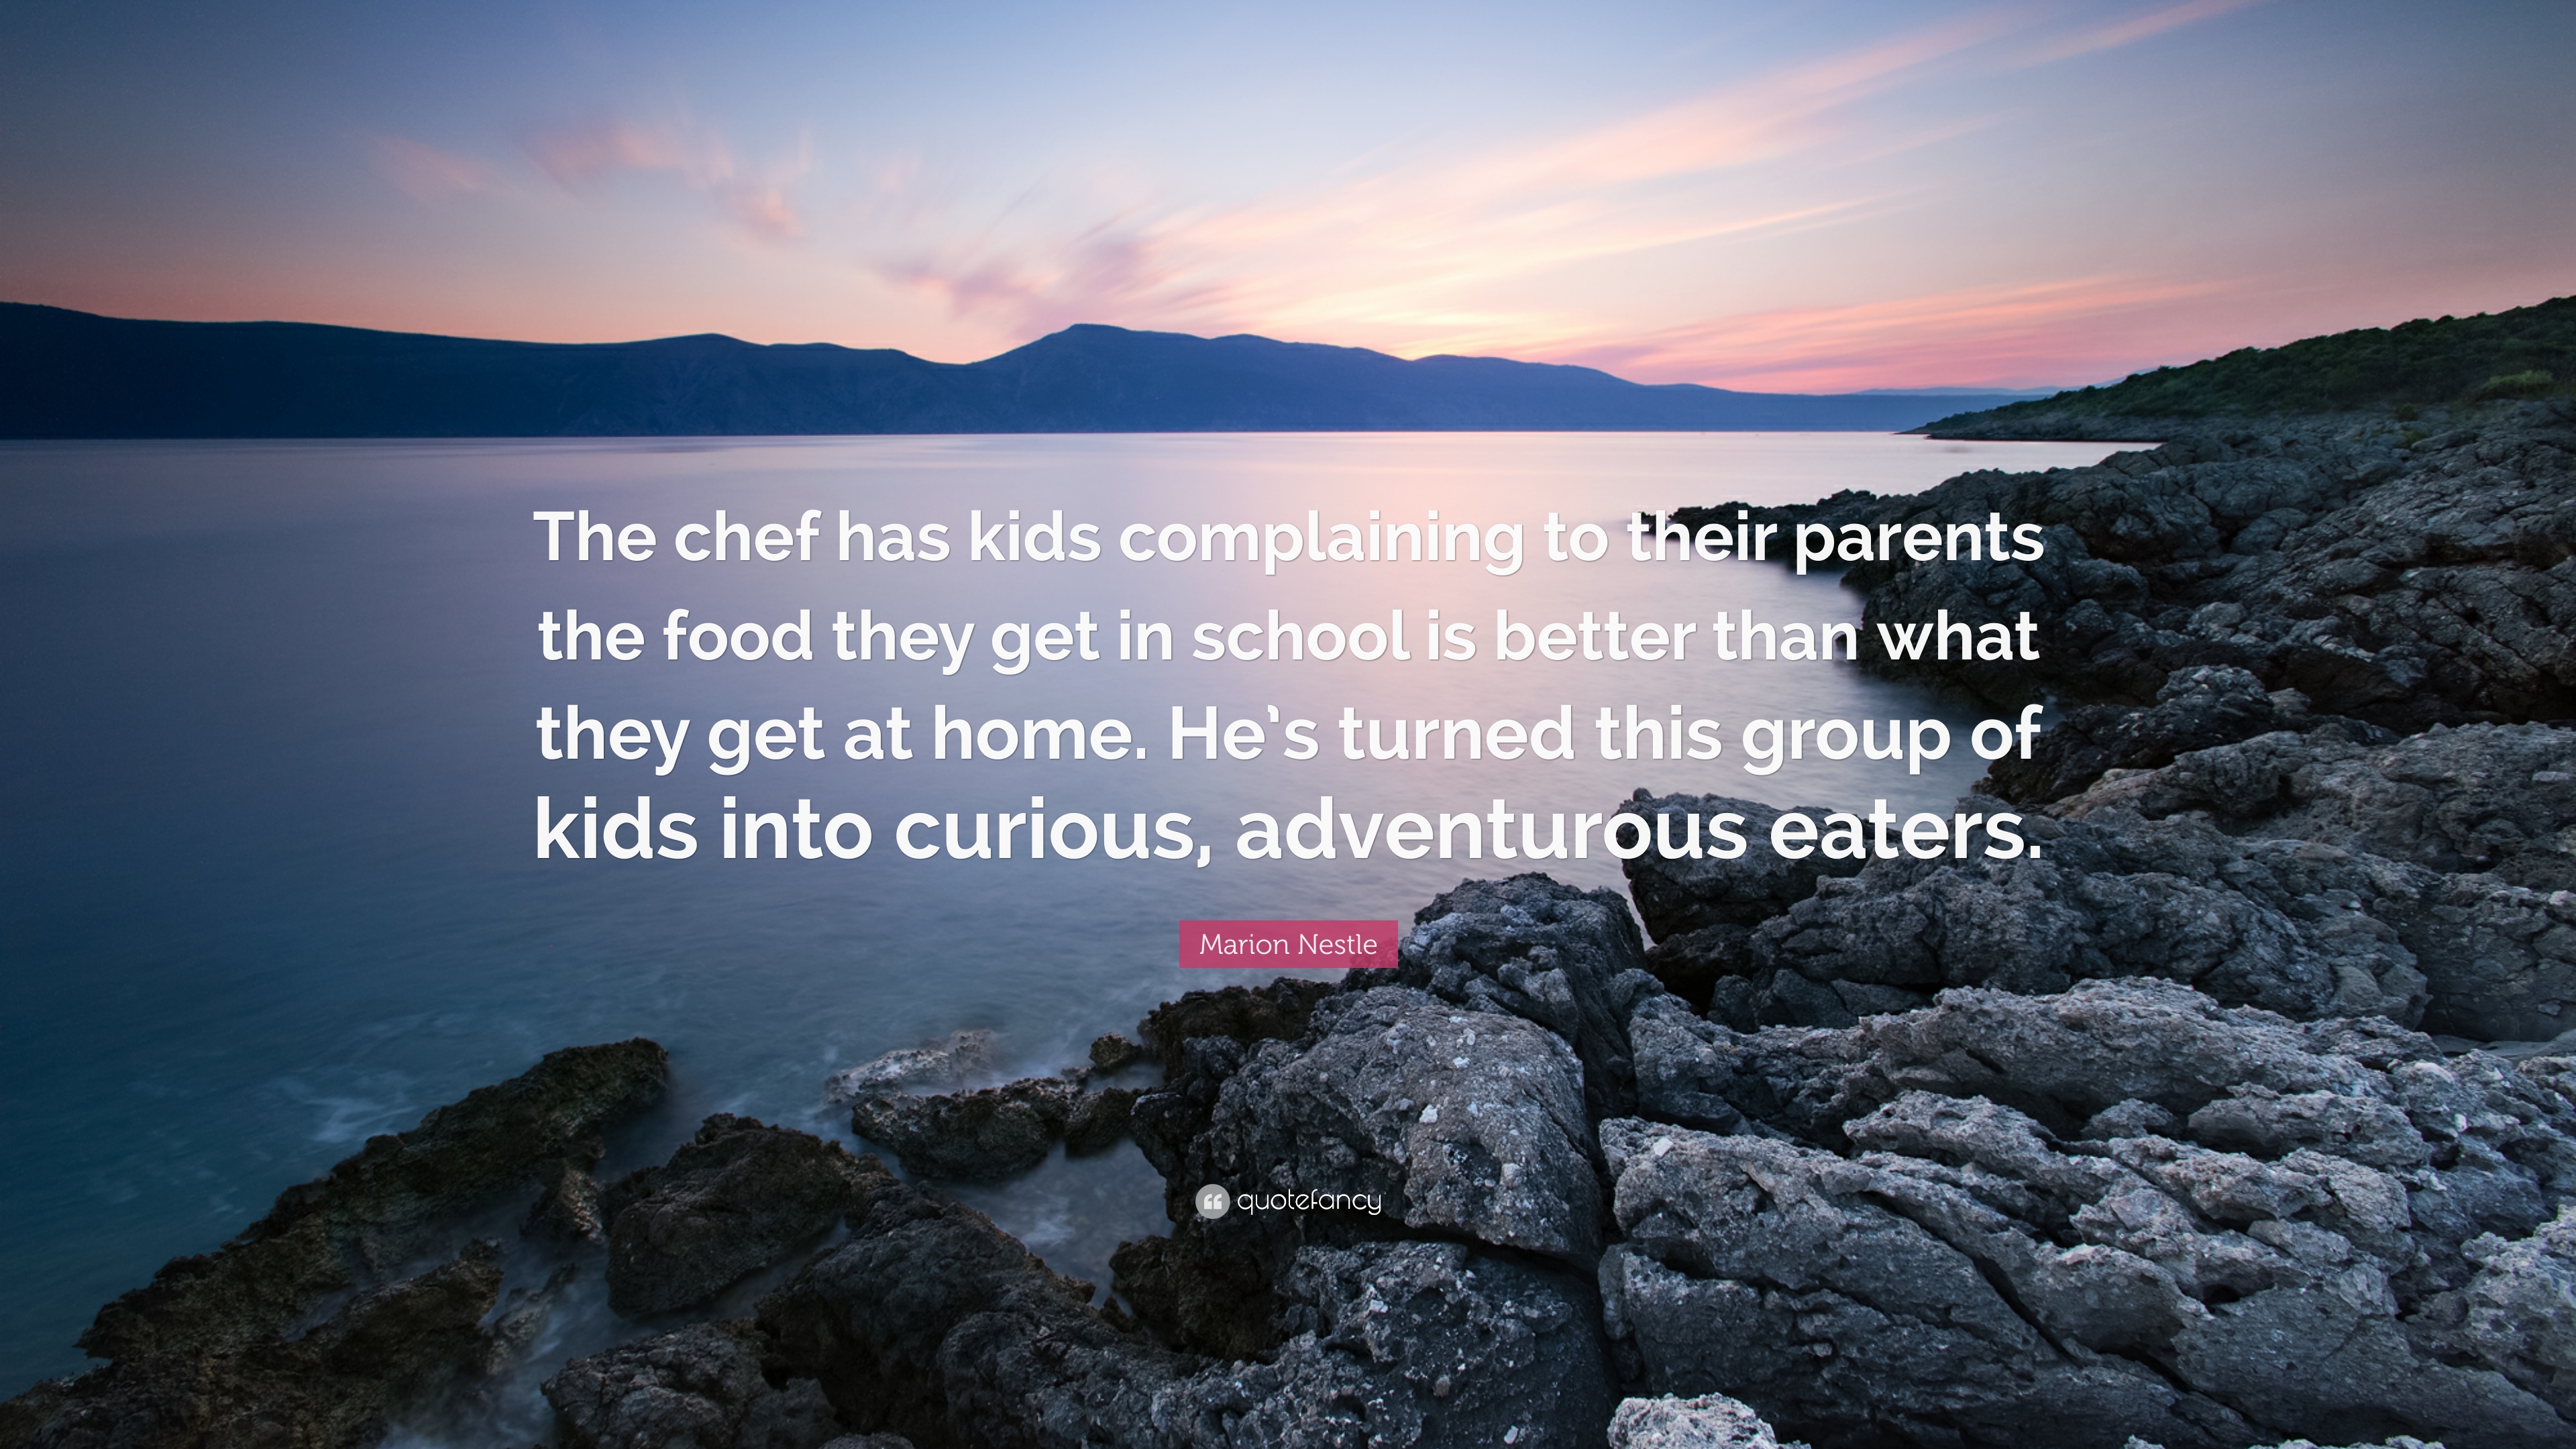 Marion Nestle Quote: “The chef has kids complaining to their parents